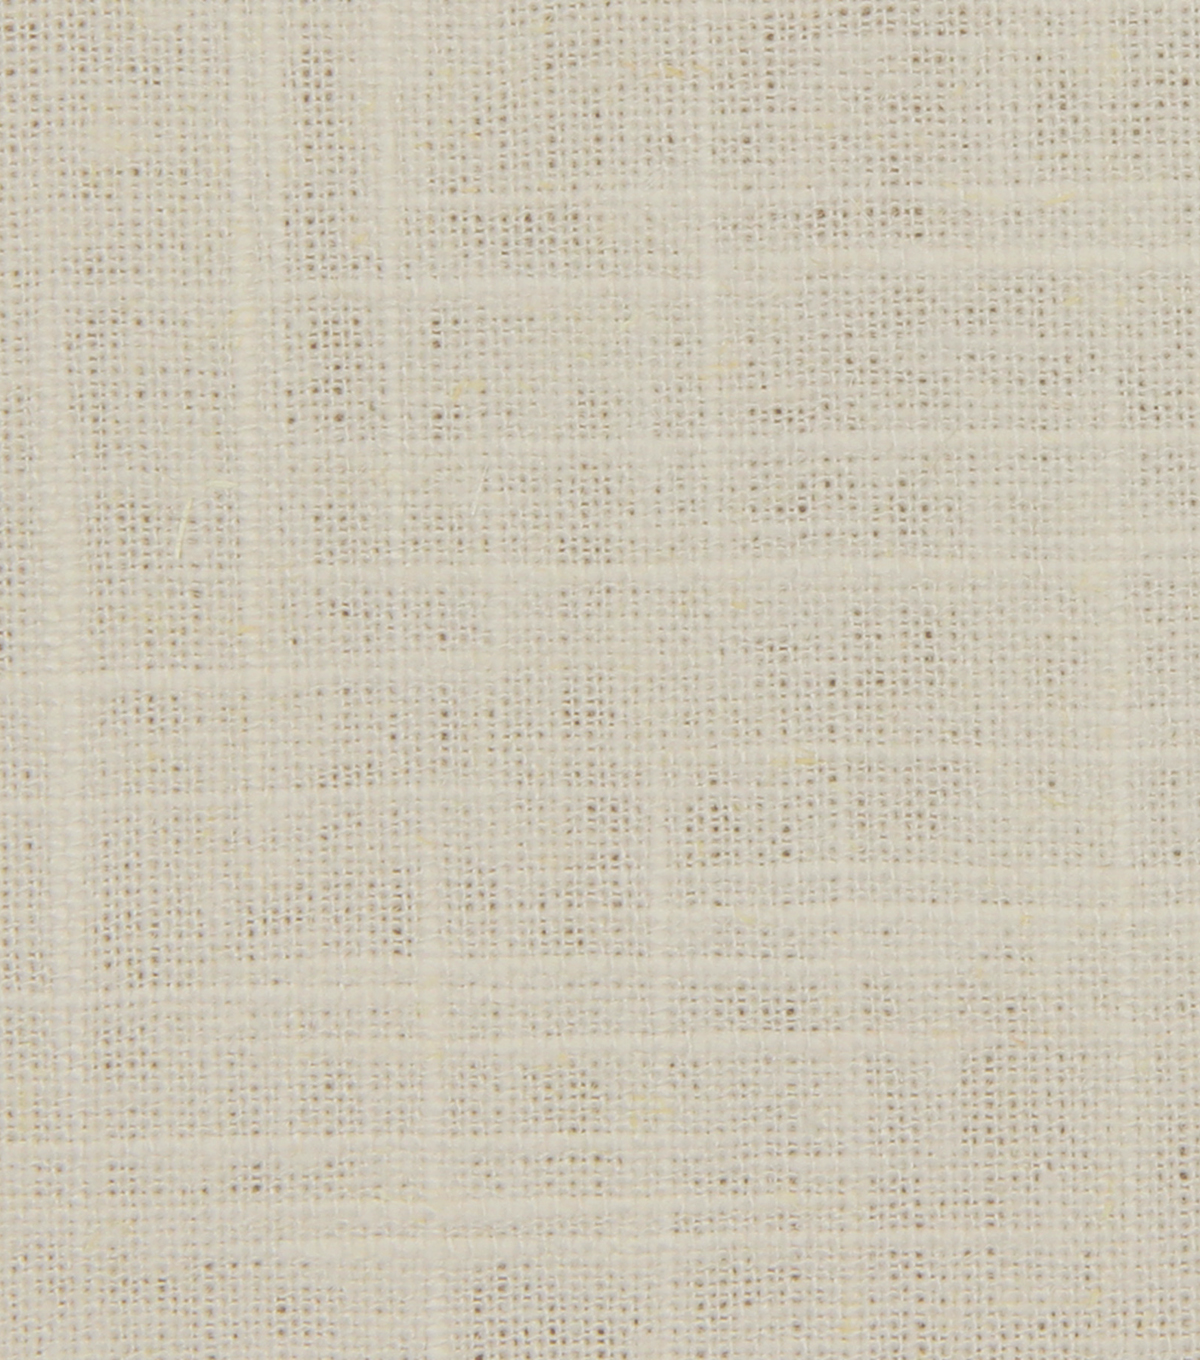 Ivory Linen coloured Sheer fabric swatch